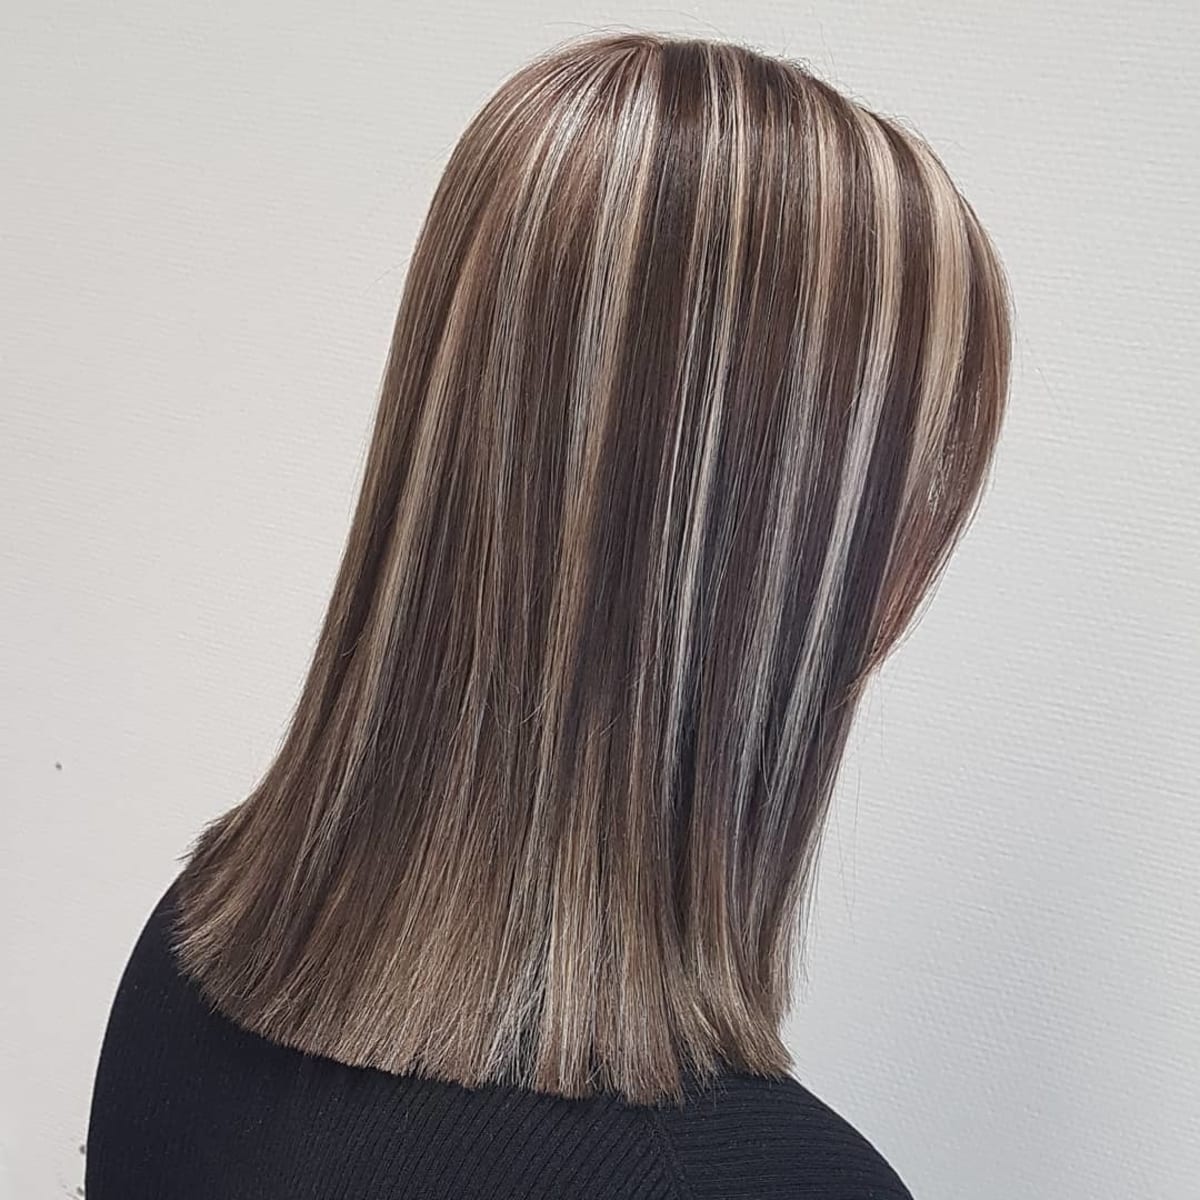 Chunky blonde highlights on a brown base